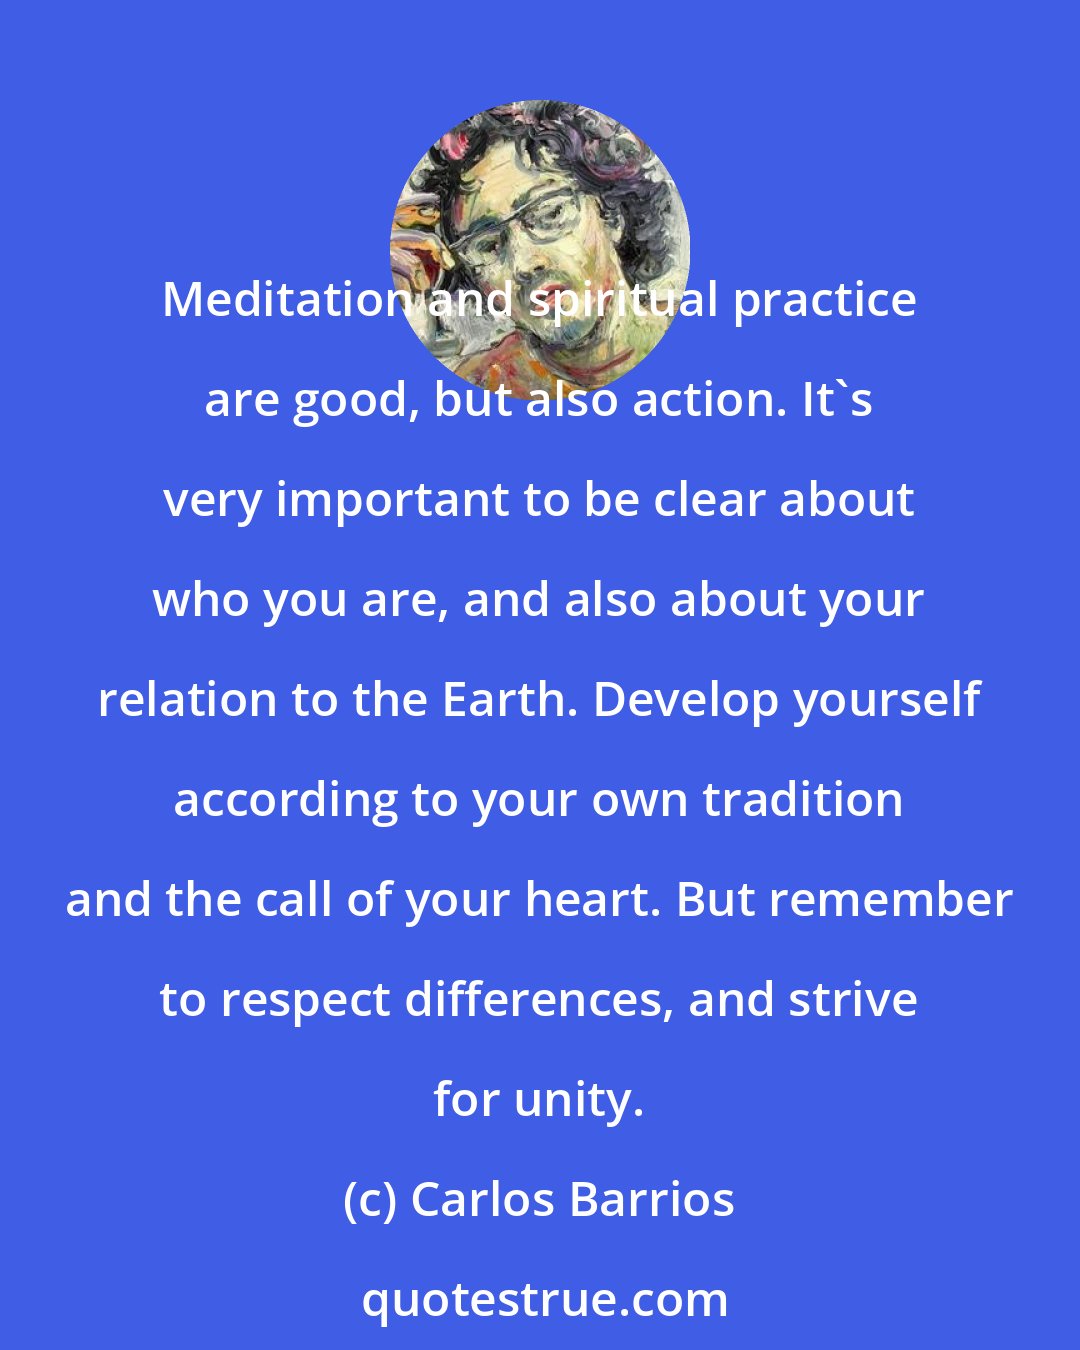 Carlos Barrios: Meditation and spiritual practice are good, but also action. It's very important to be clear about who you are, and also about your relation to the Earth. Develop yourself according to your own tradition and the call of your heart. But remember to respect differences, and strive for unity.